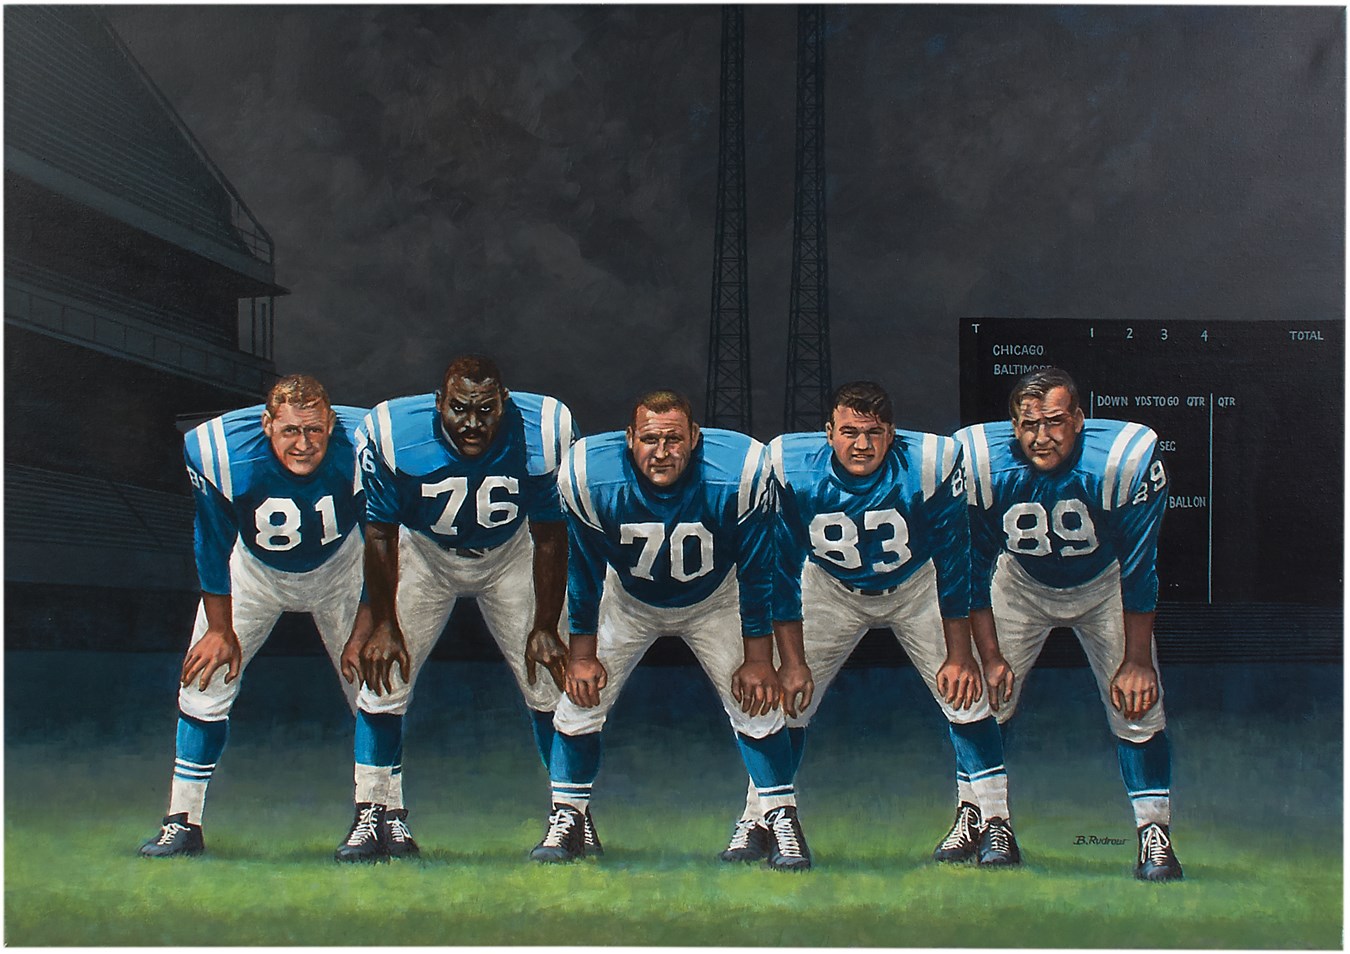 Football - 1958 "Greatest Game Ever Played" Baltimore Colts Defensive Line Oil on Canvas by Bill Rudrow